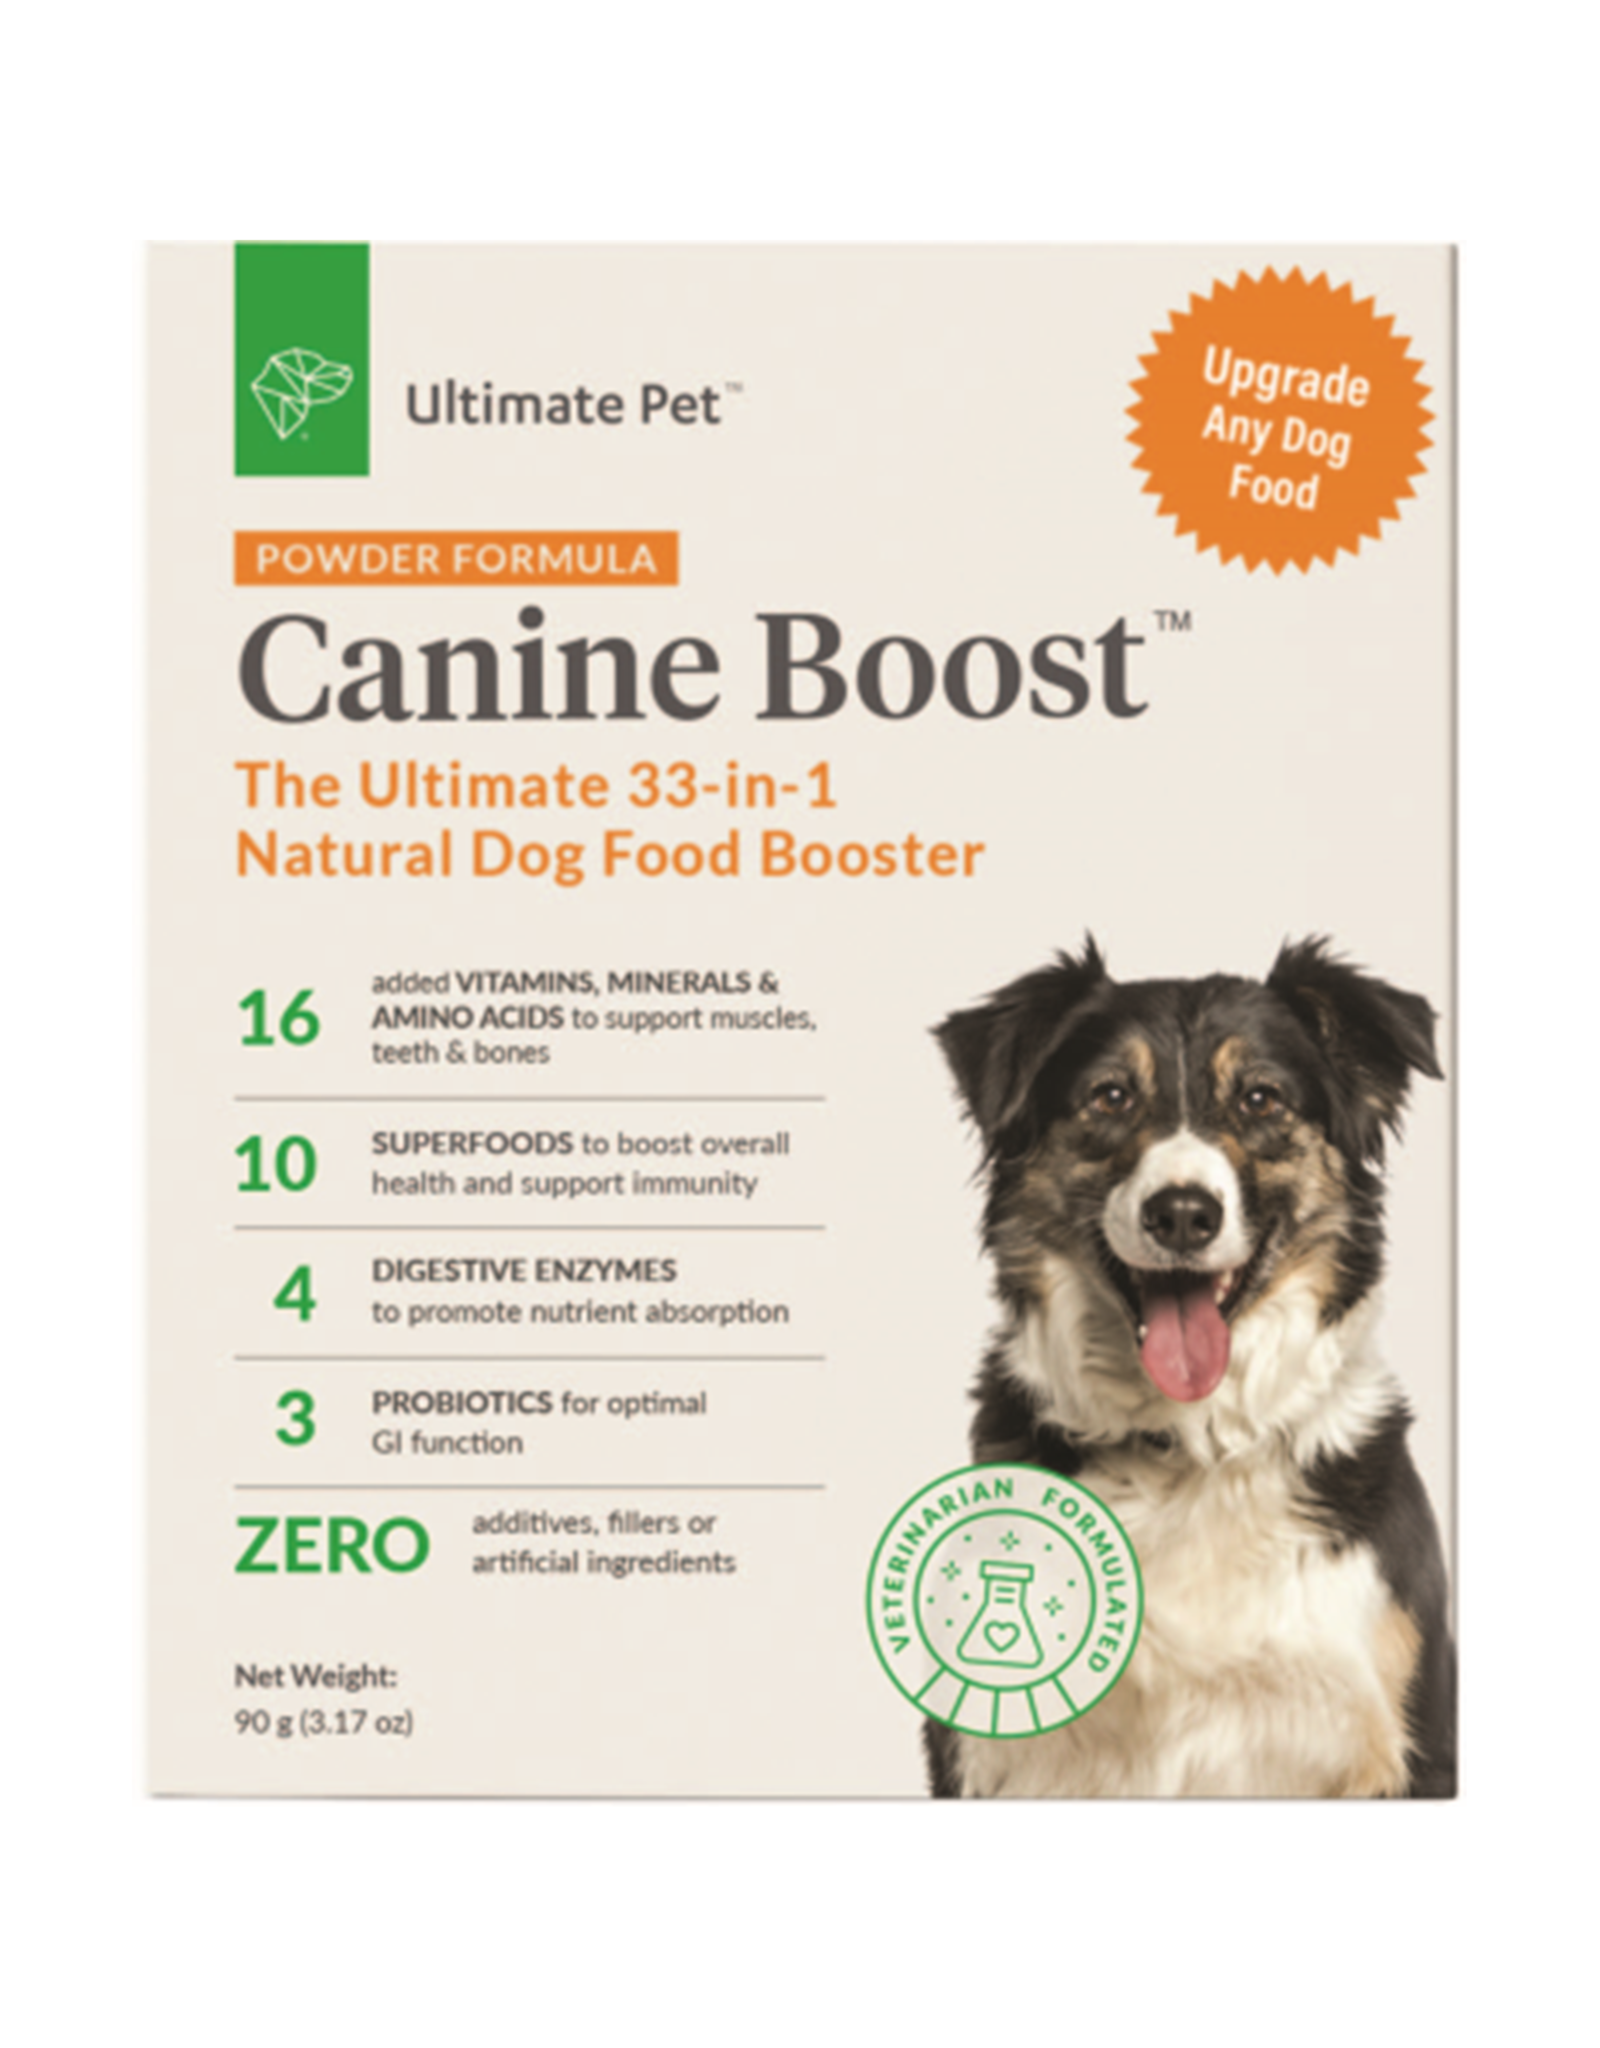 Ultimate Pet Nutrition Canine Boost Powder 3.17oz